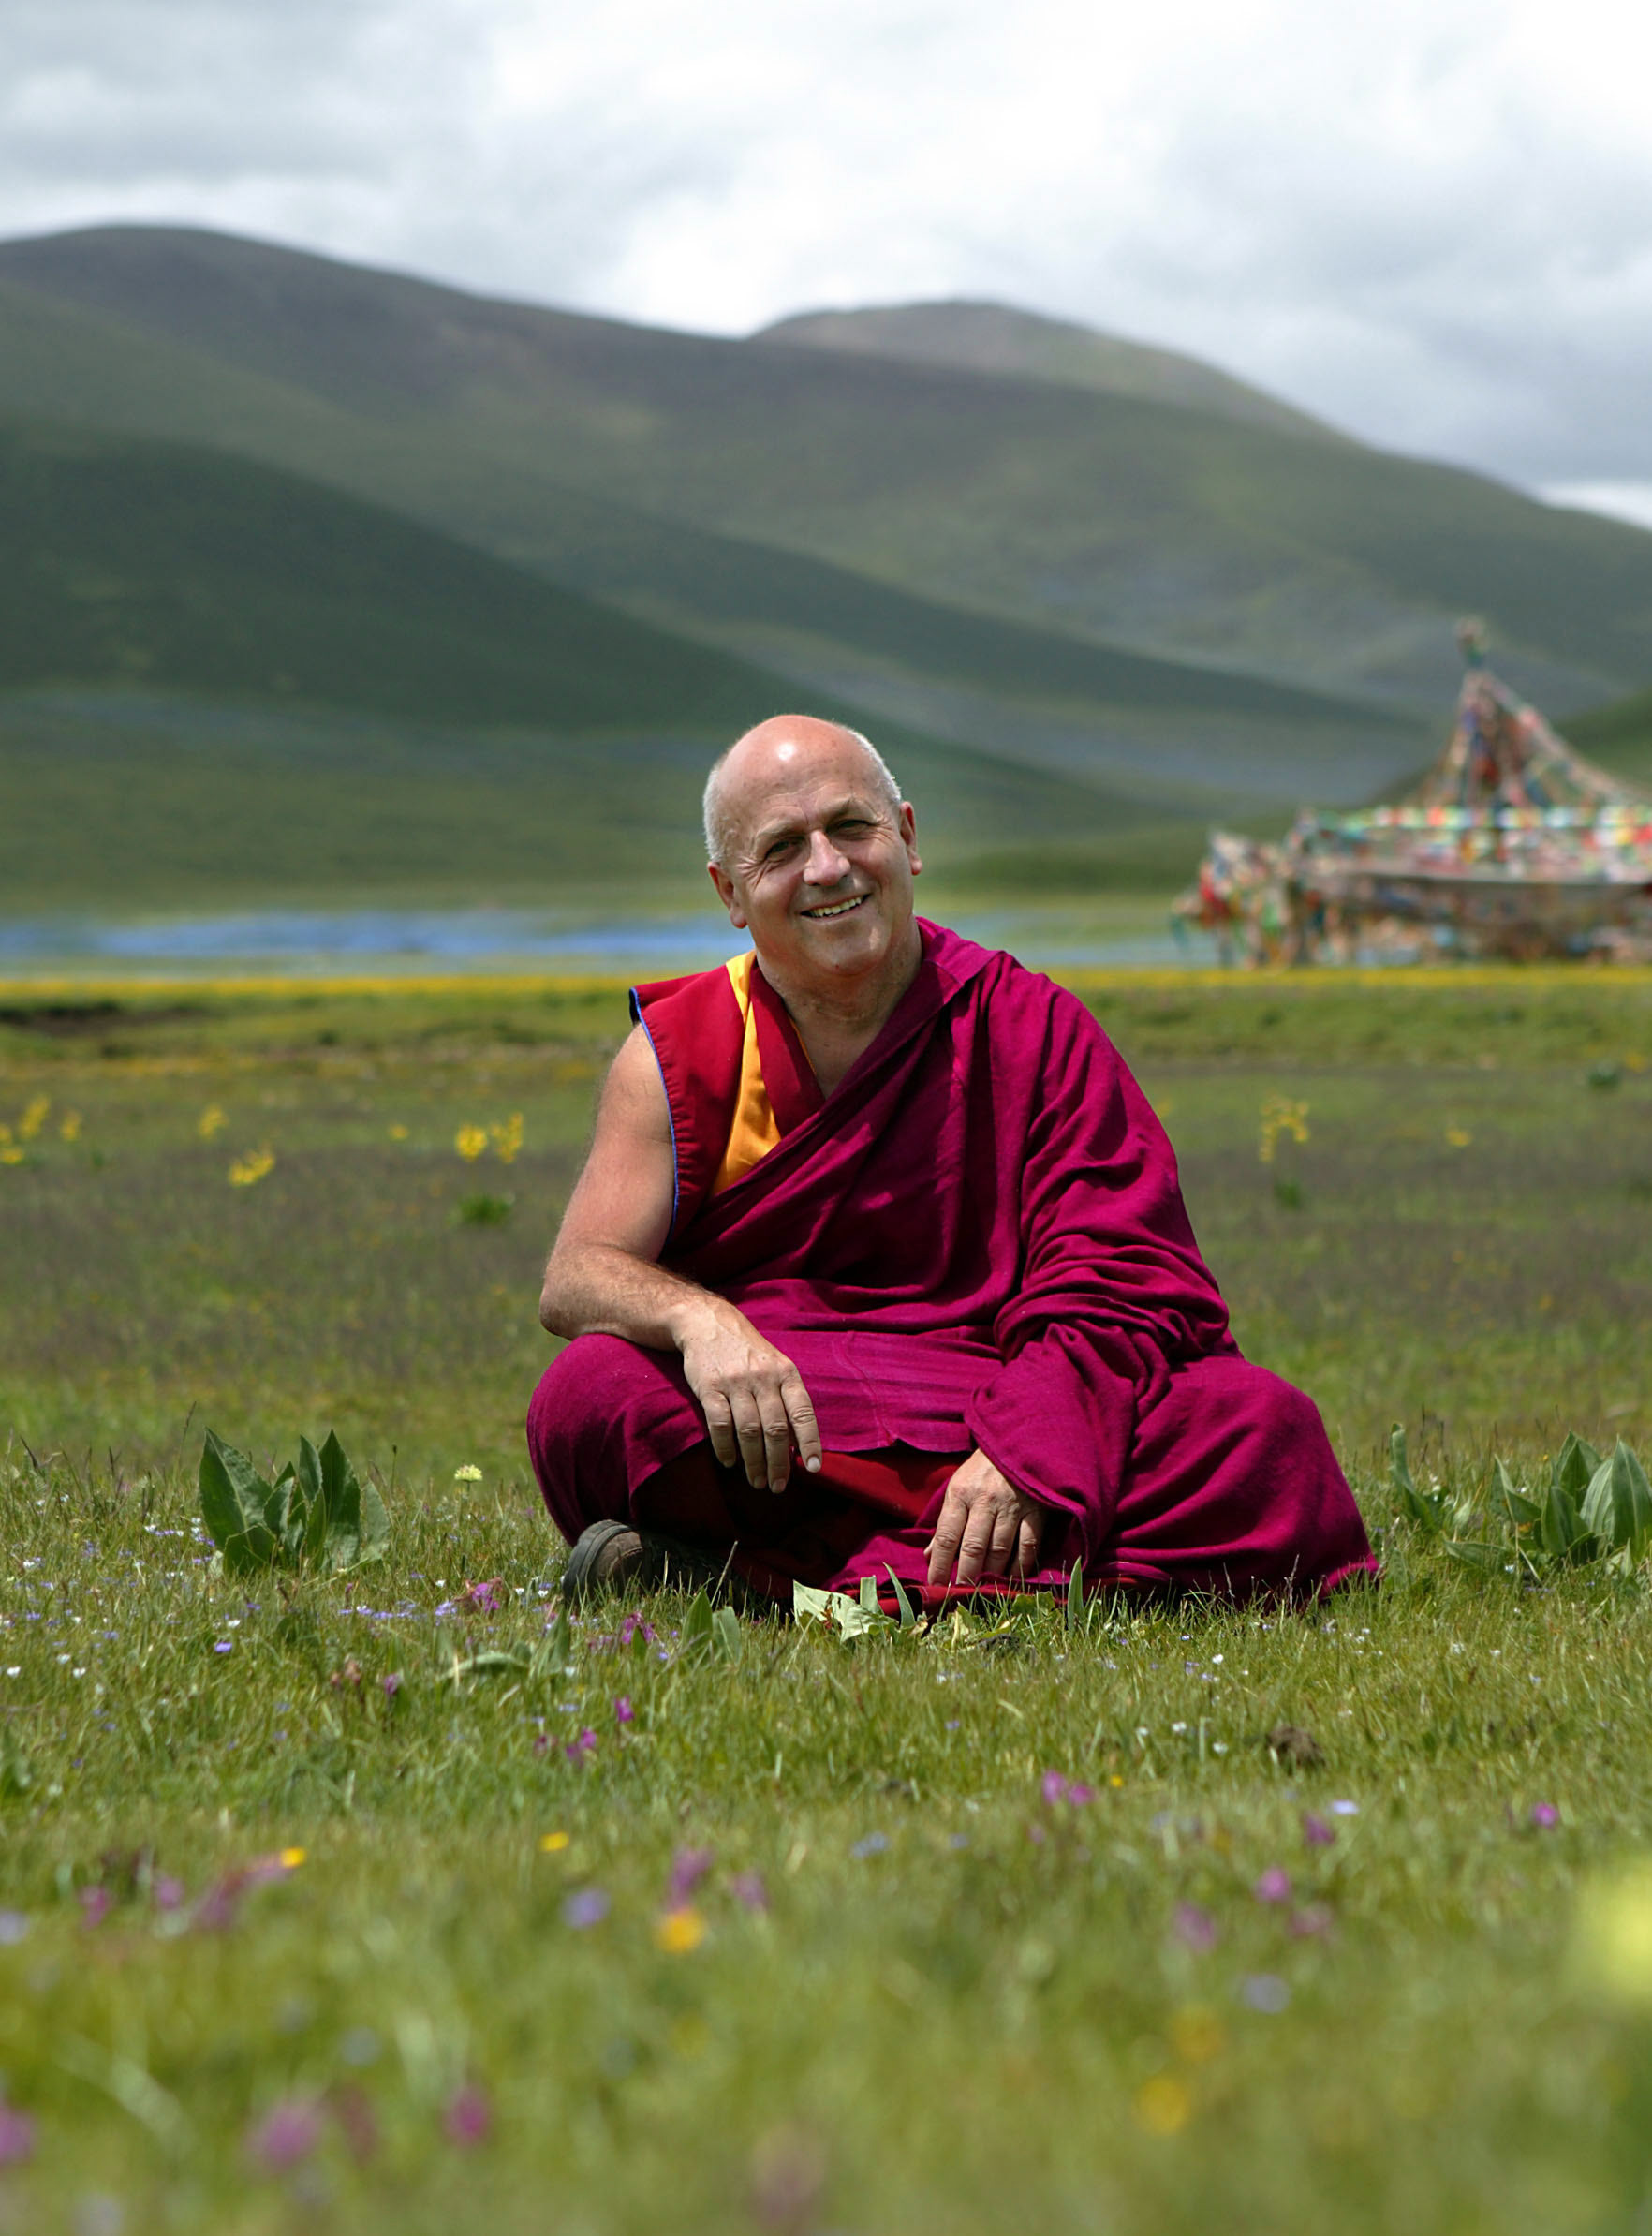 The Smile of the Monk